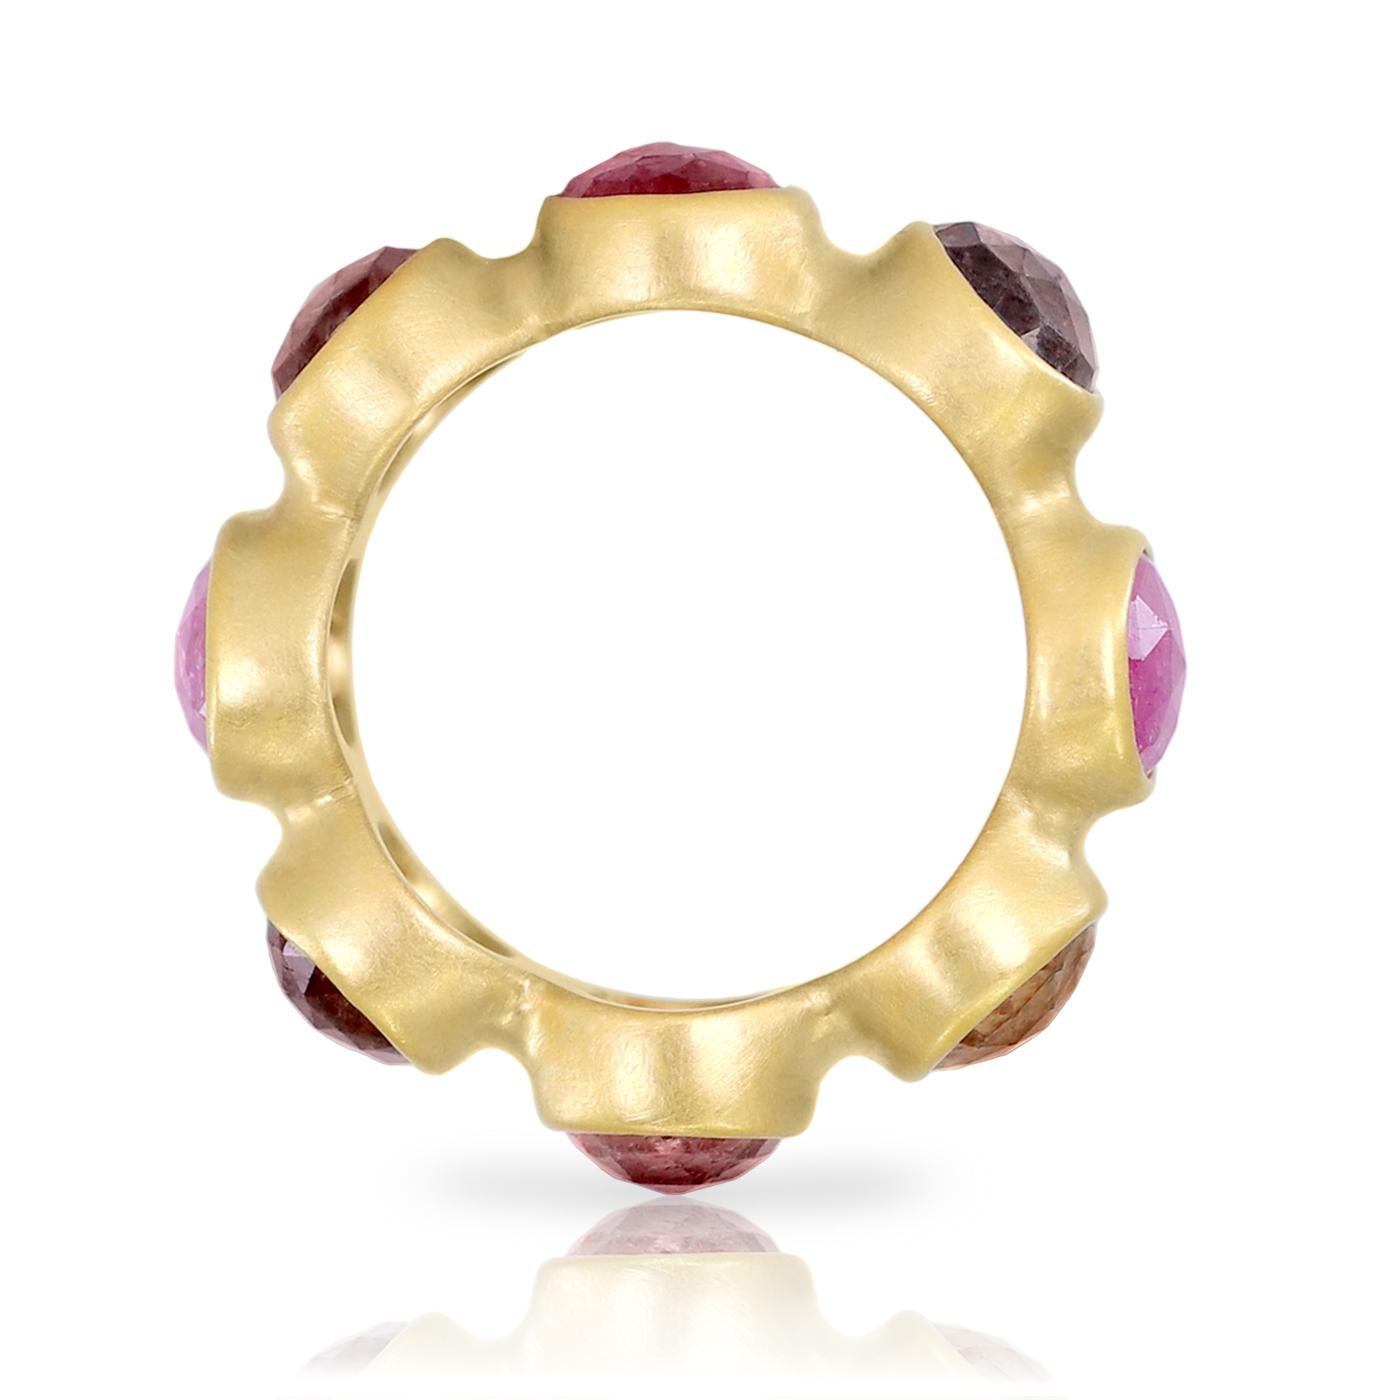 One of a Kind Eternity Band handcrafted in signature-finished 18k yellow gold by master jewelry maker Lola Brooks featuring stunning, natural, no heat oval rose-cut Umba sapphires in assorted pink hues and tones totaling 11.06 carats. Size 6.0 (can